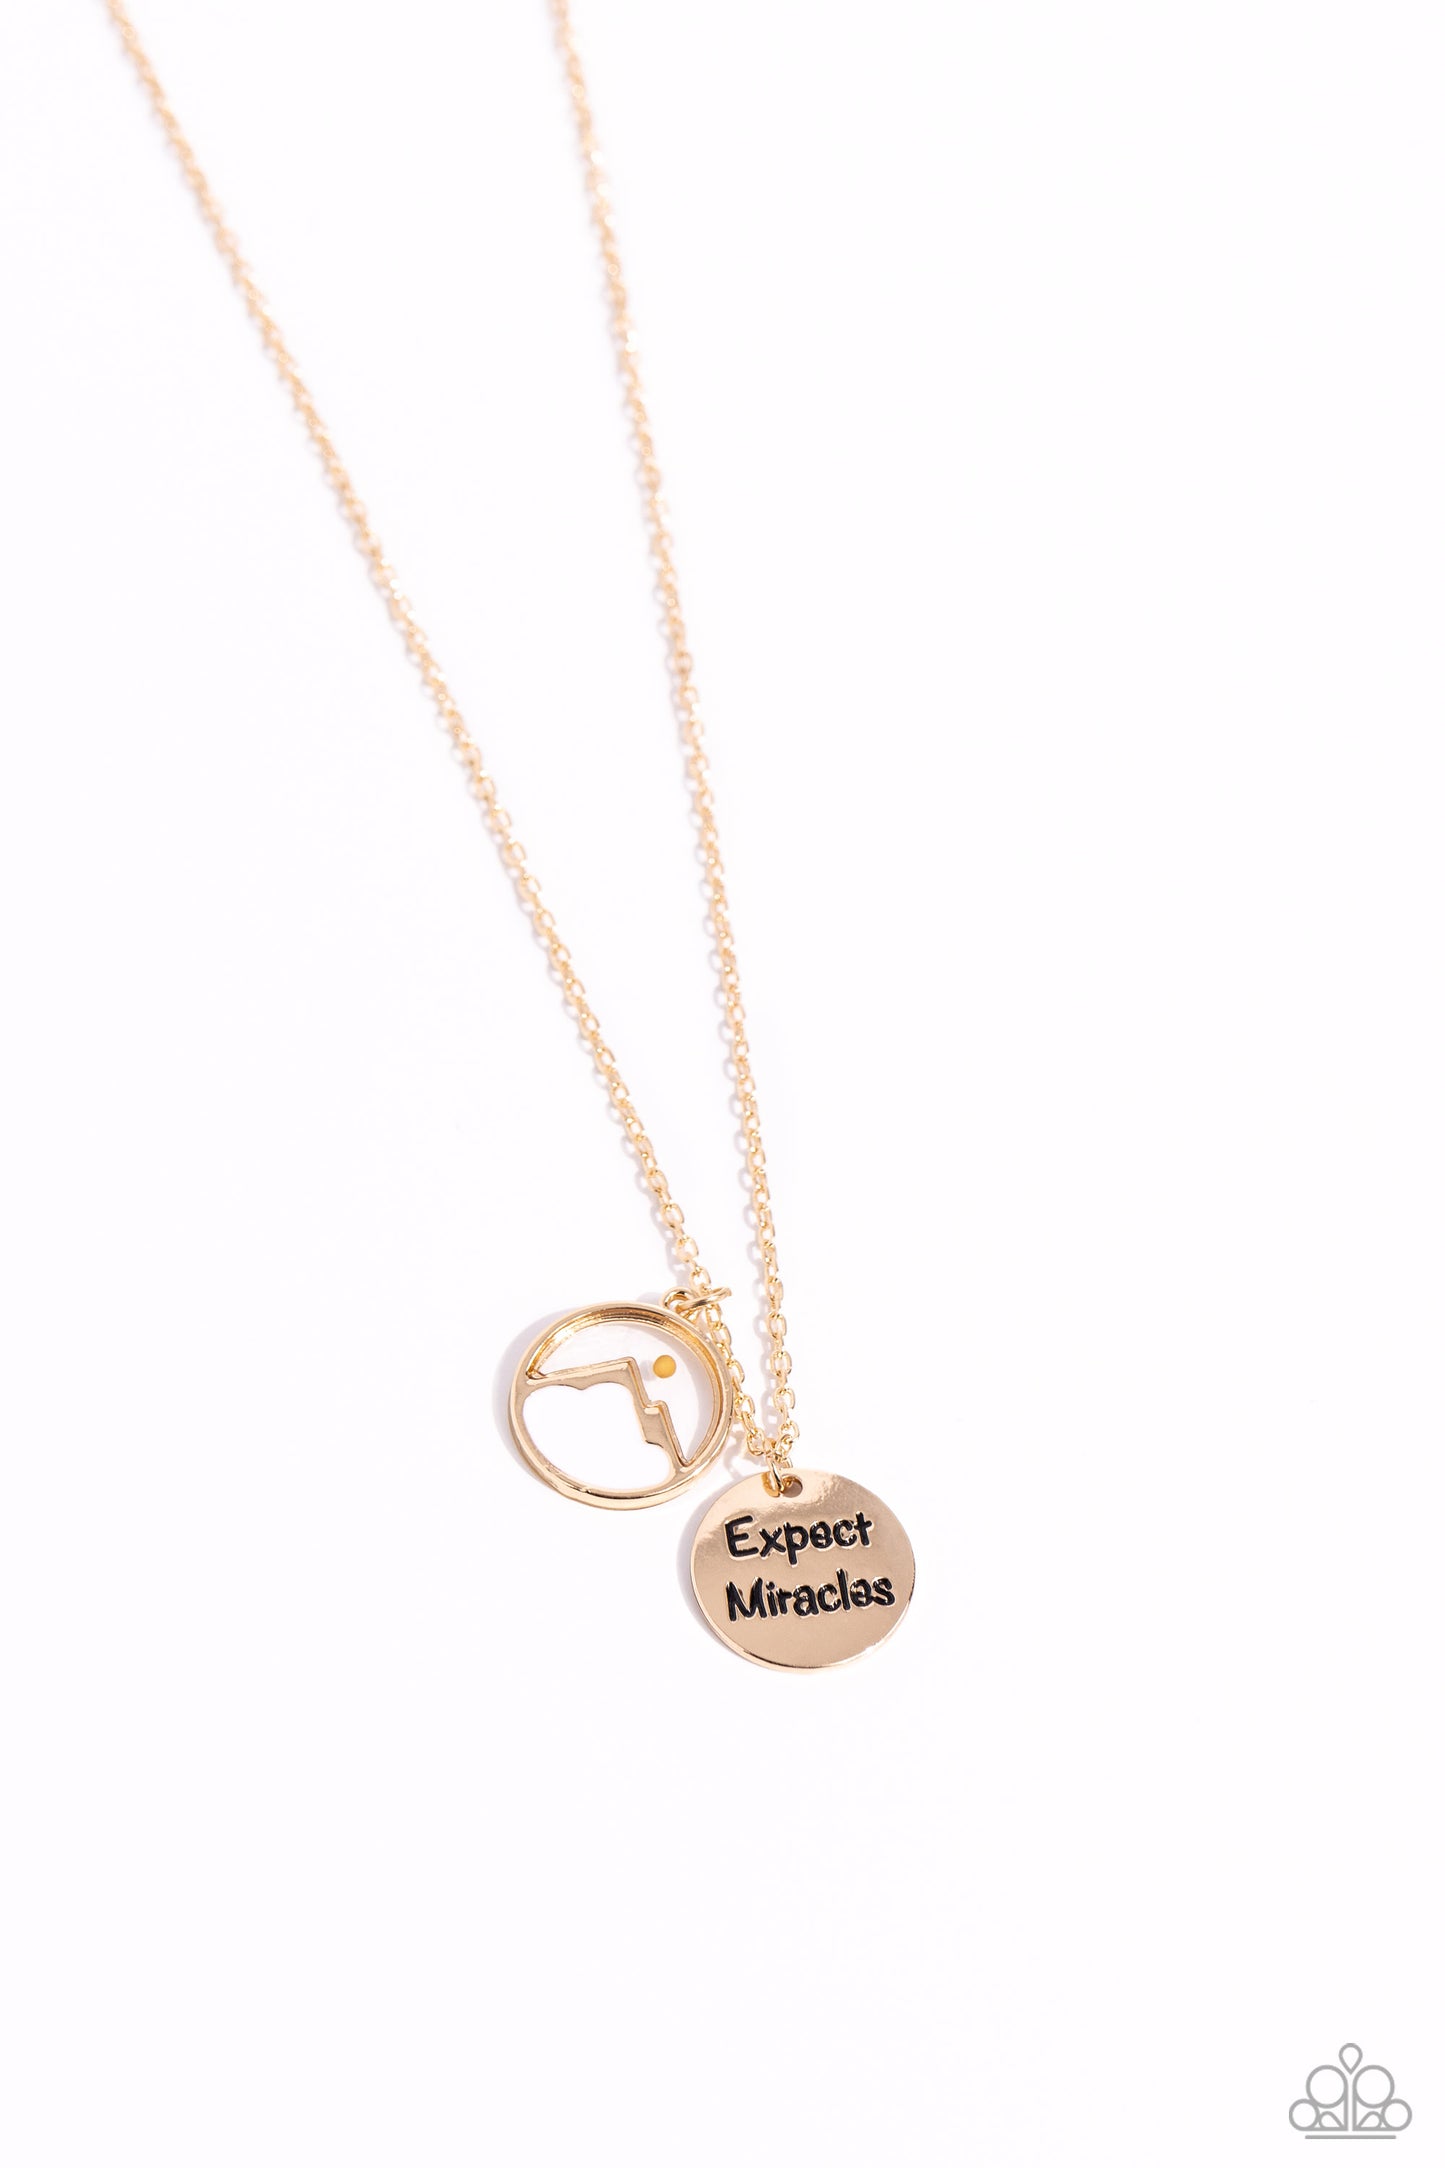 Expect Miracles - gold - Paparazzi necklace